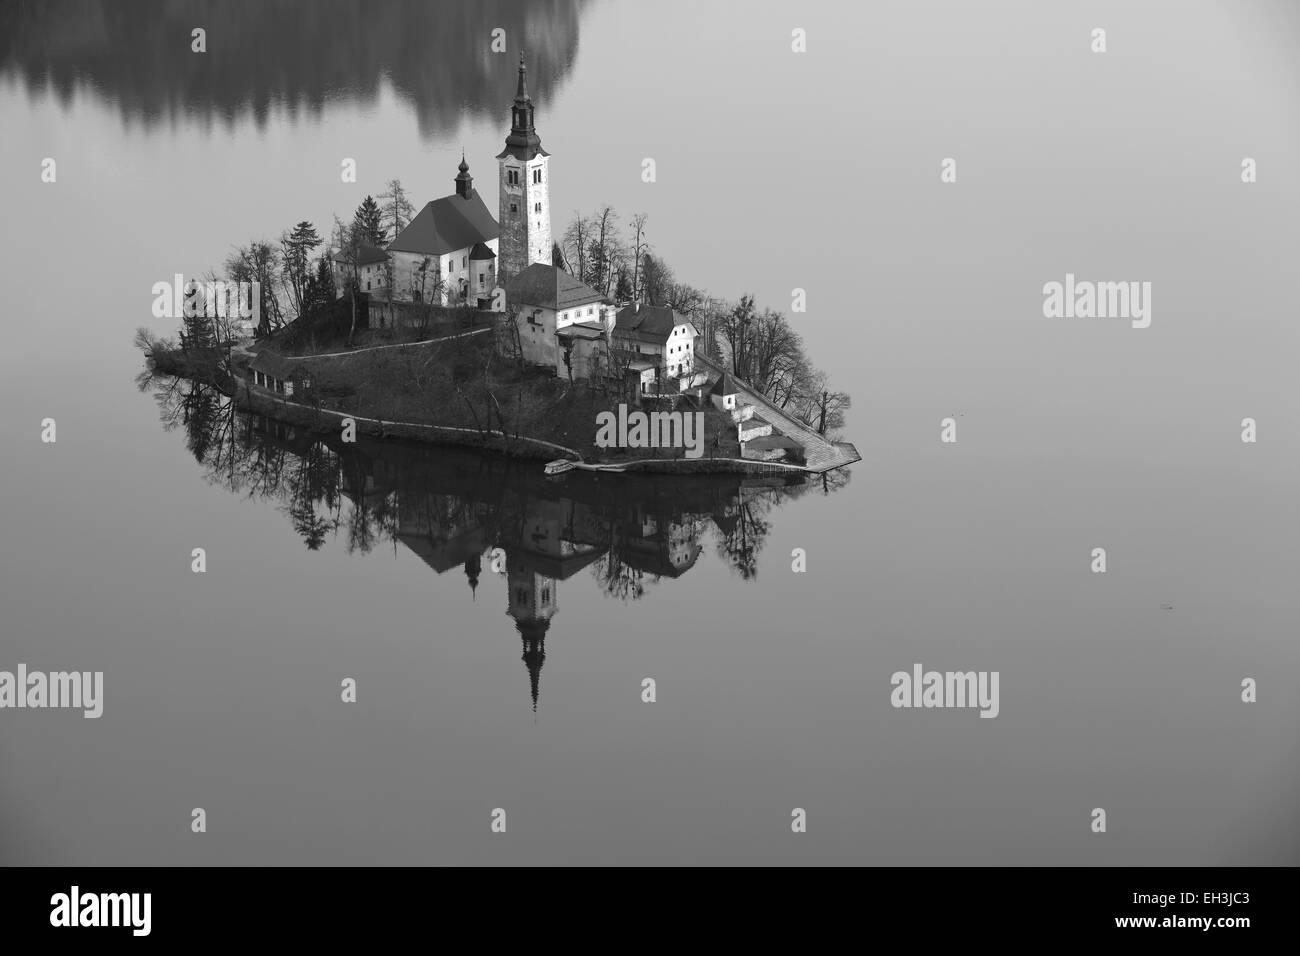 Lake Bled. Black and white image of Lake Bled with St. Marys Church of the Assumption on the small island. Bled, Slovenia,Europe Stock Photo